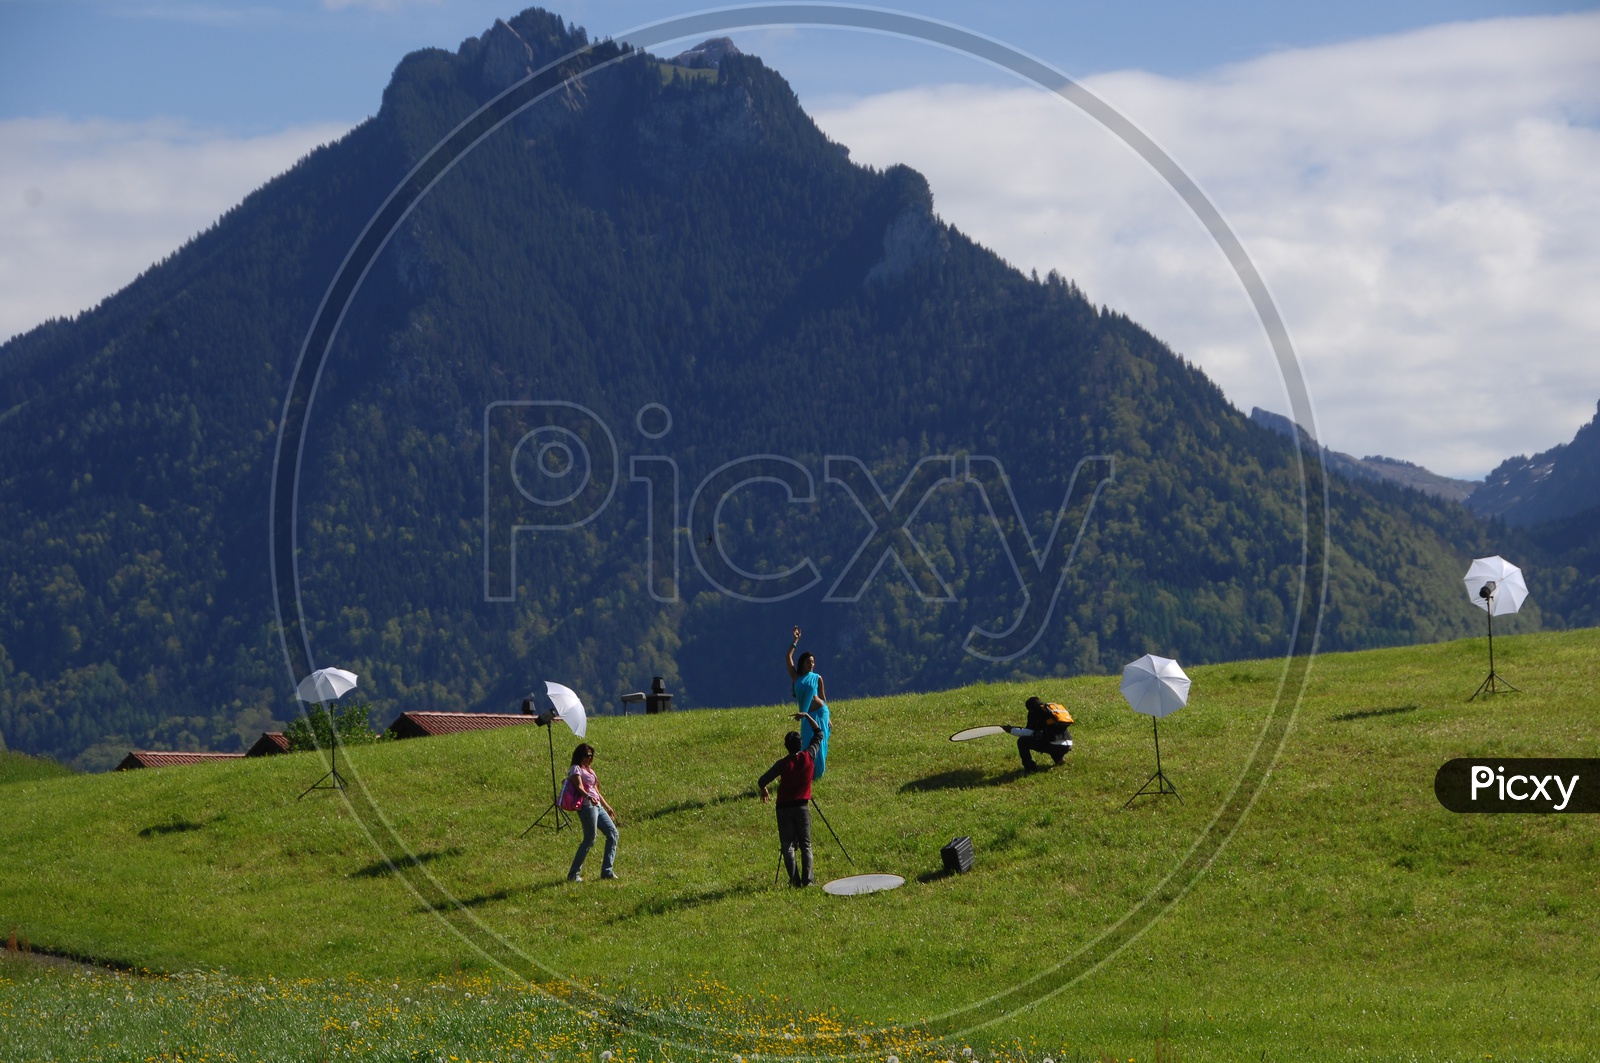 Photo Shoot In Swiss Alps With Mountains in Background In Movie Working Stills